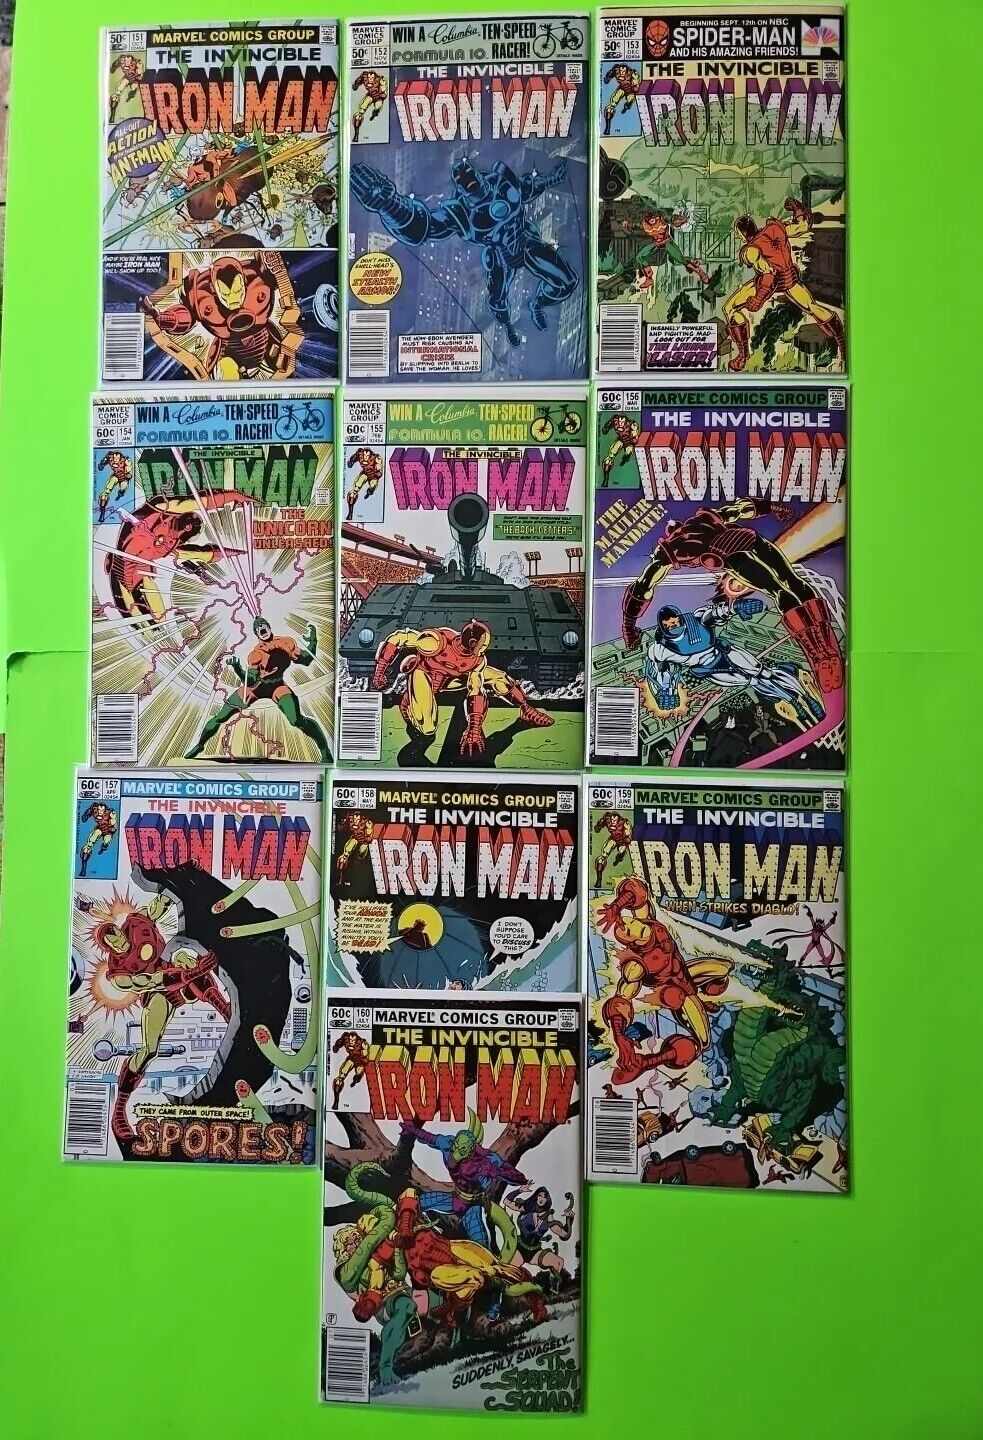 Iron Man #151-160 ALL NEWSTANDS 1981 V1 AVG COND IS FINE SEE PICTURES BRONZE ERA